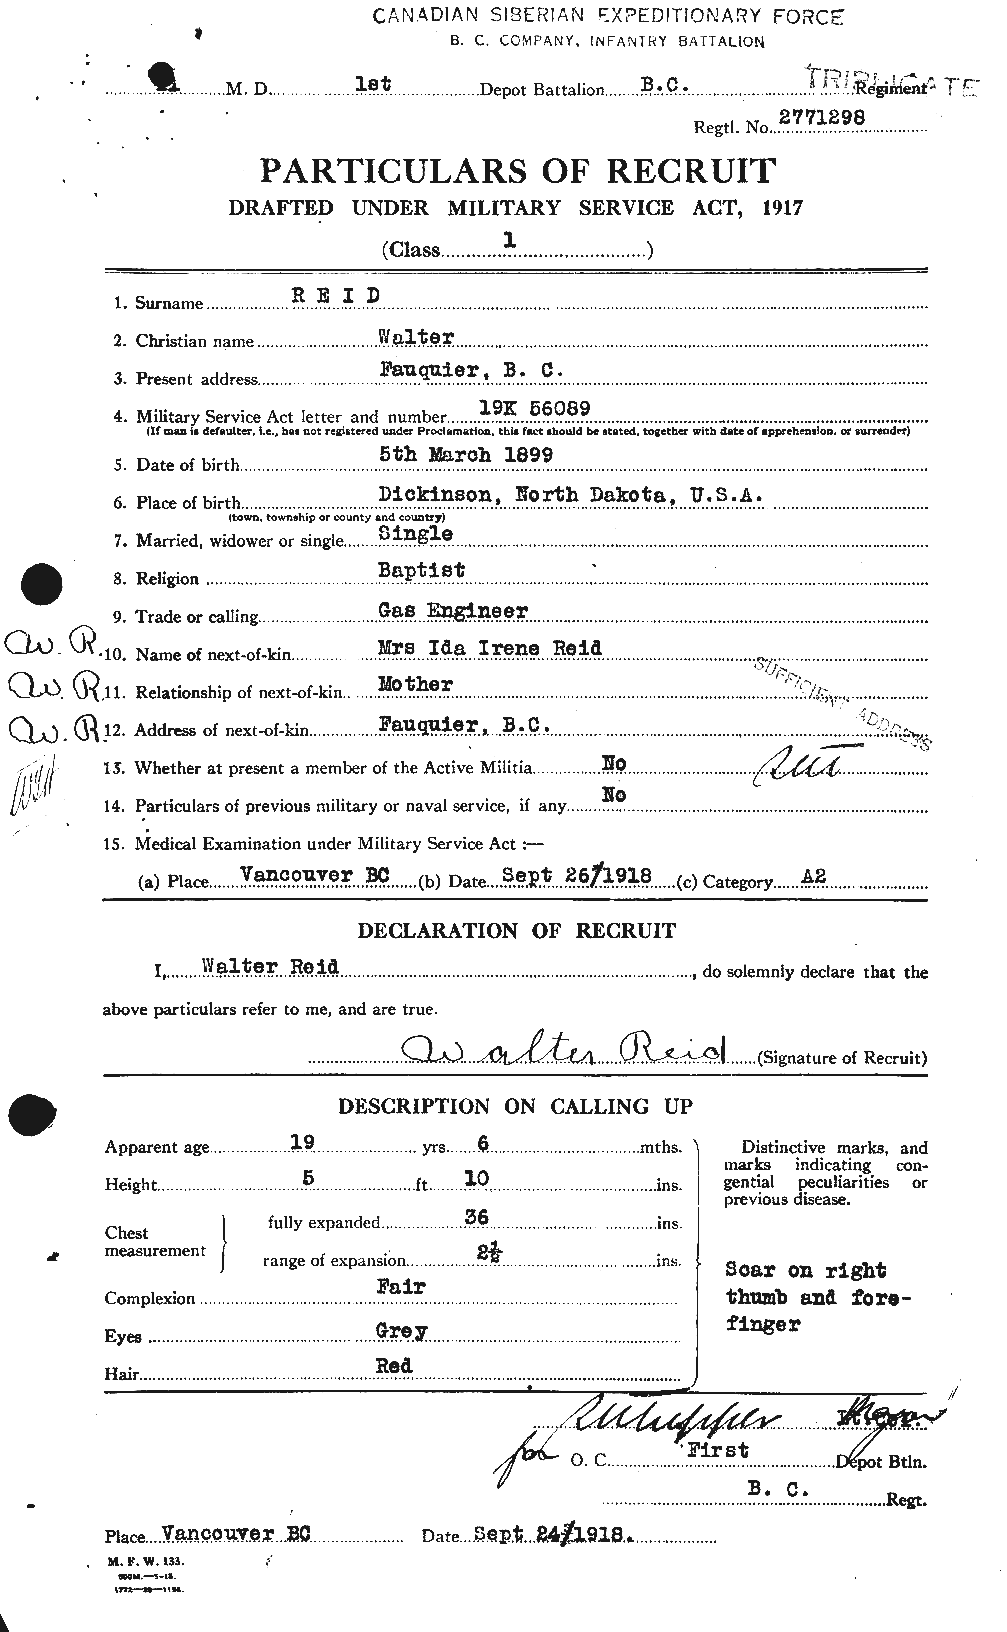 Personnel Records of the First World War - CEF 596887a